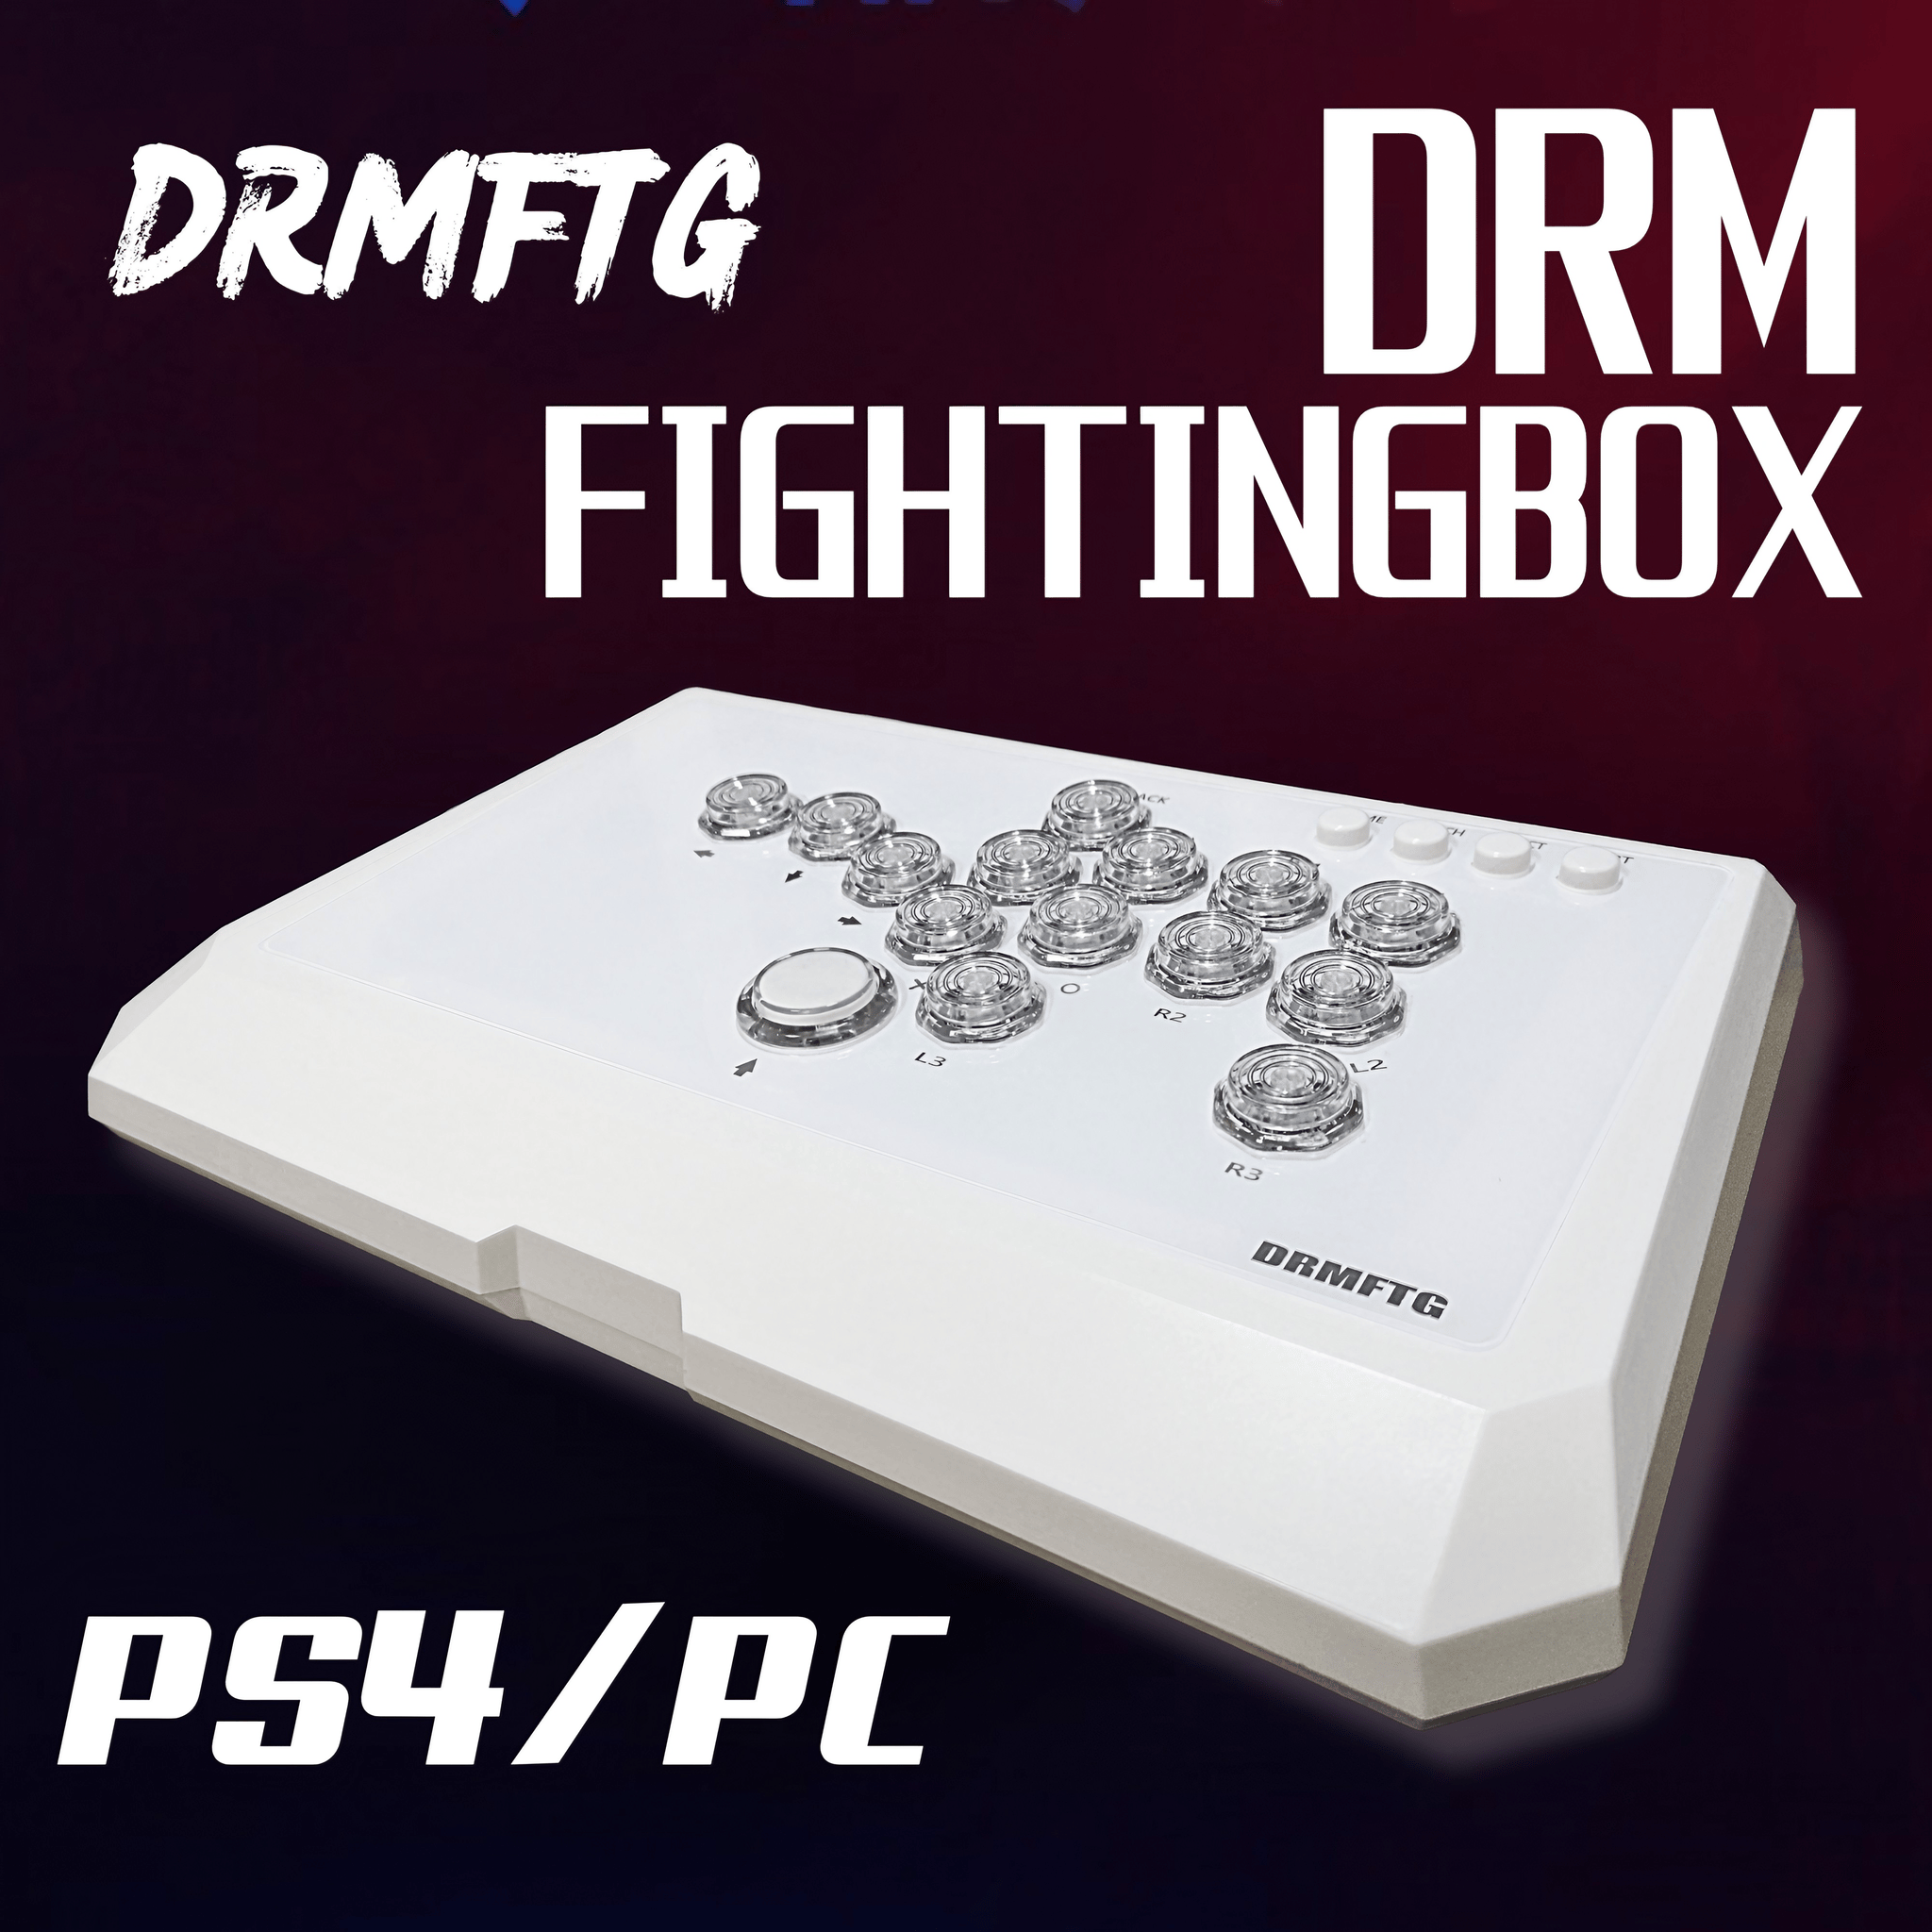 DRMFTG Fighting Box - A-TYPE